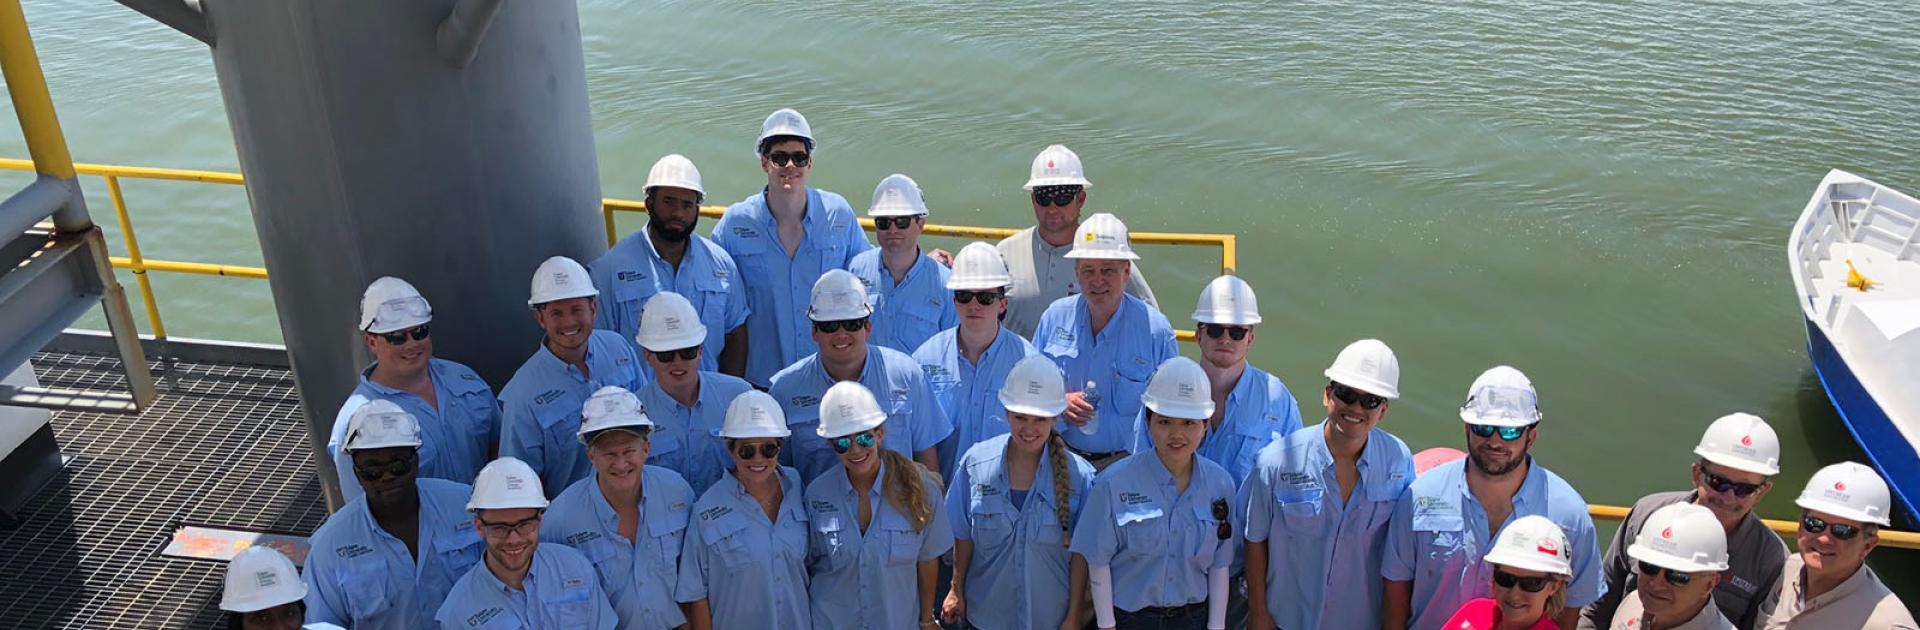 Students on an Oil Platform during an energy site visit